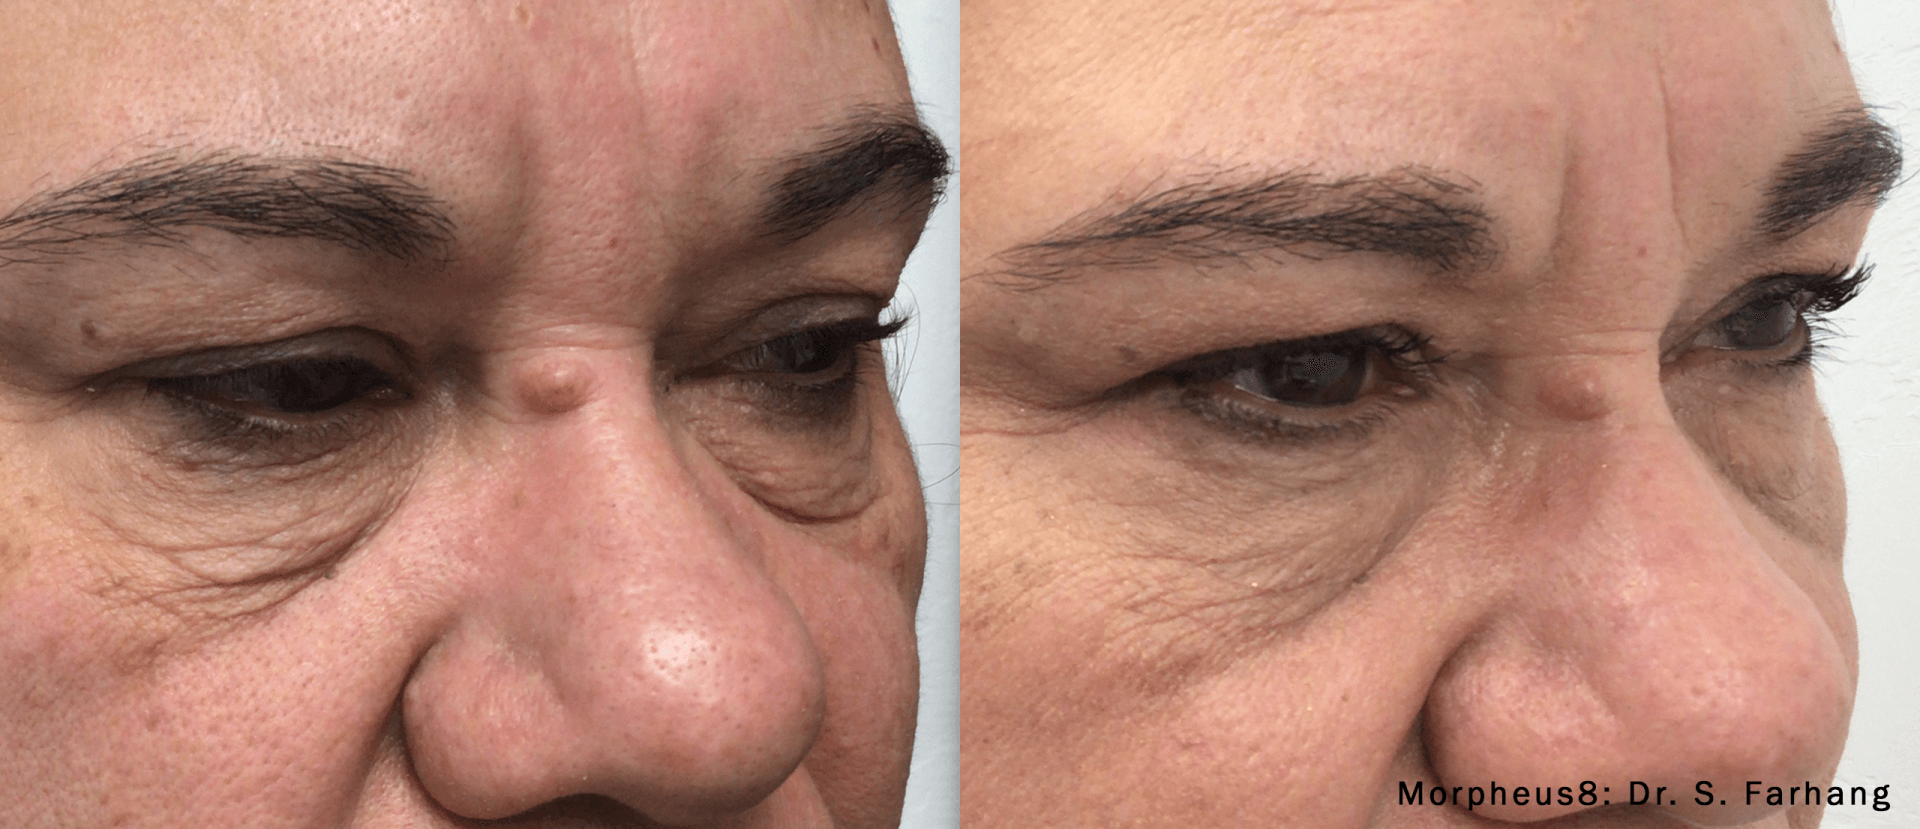 closeup of patient's face Before and After Morpheus8 Treatment